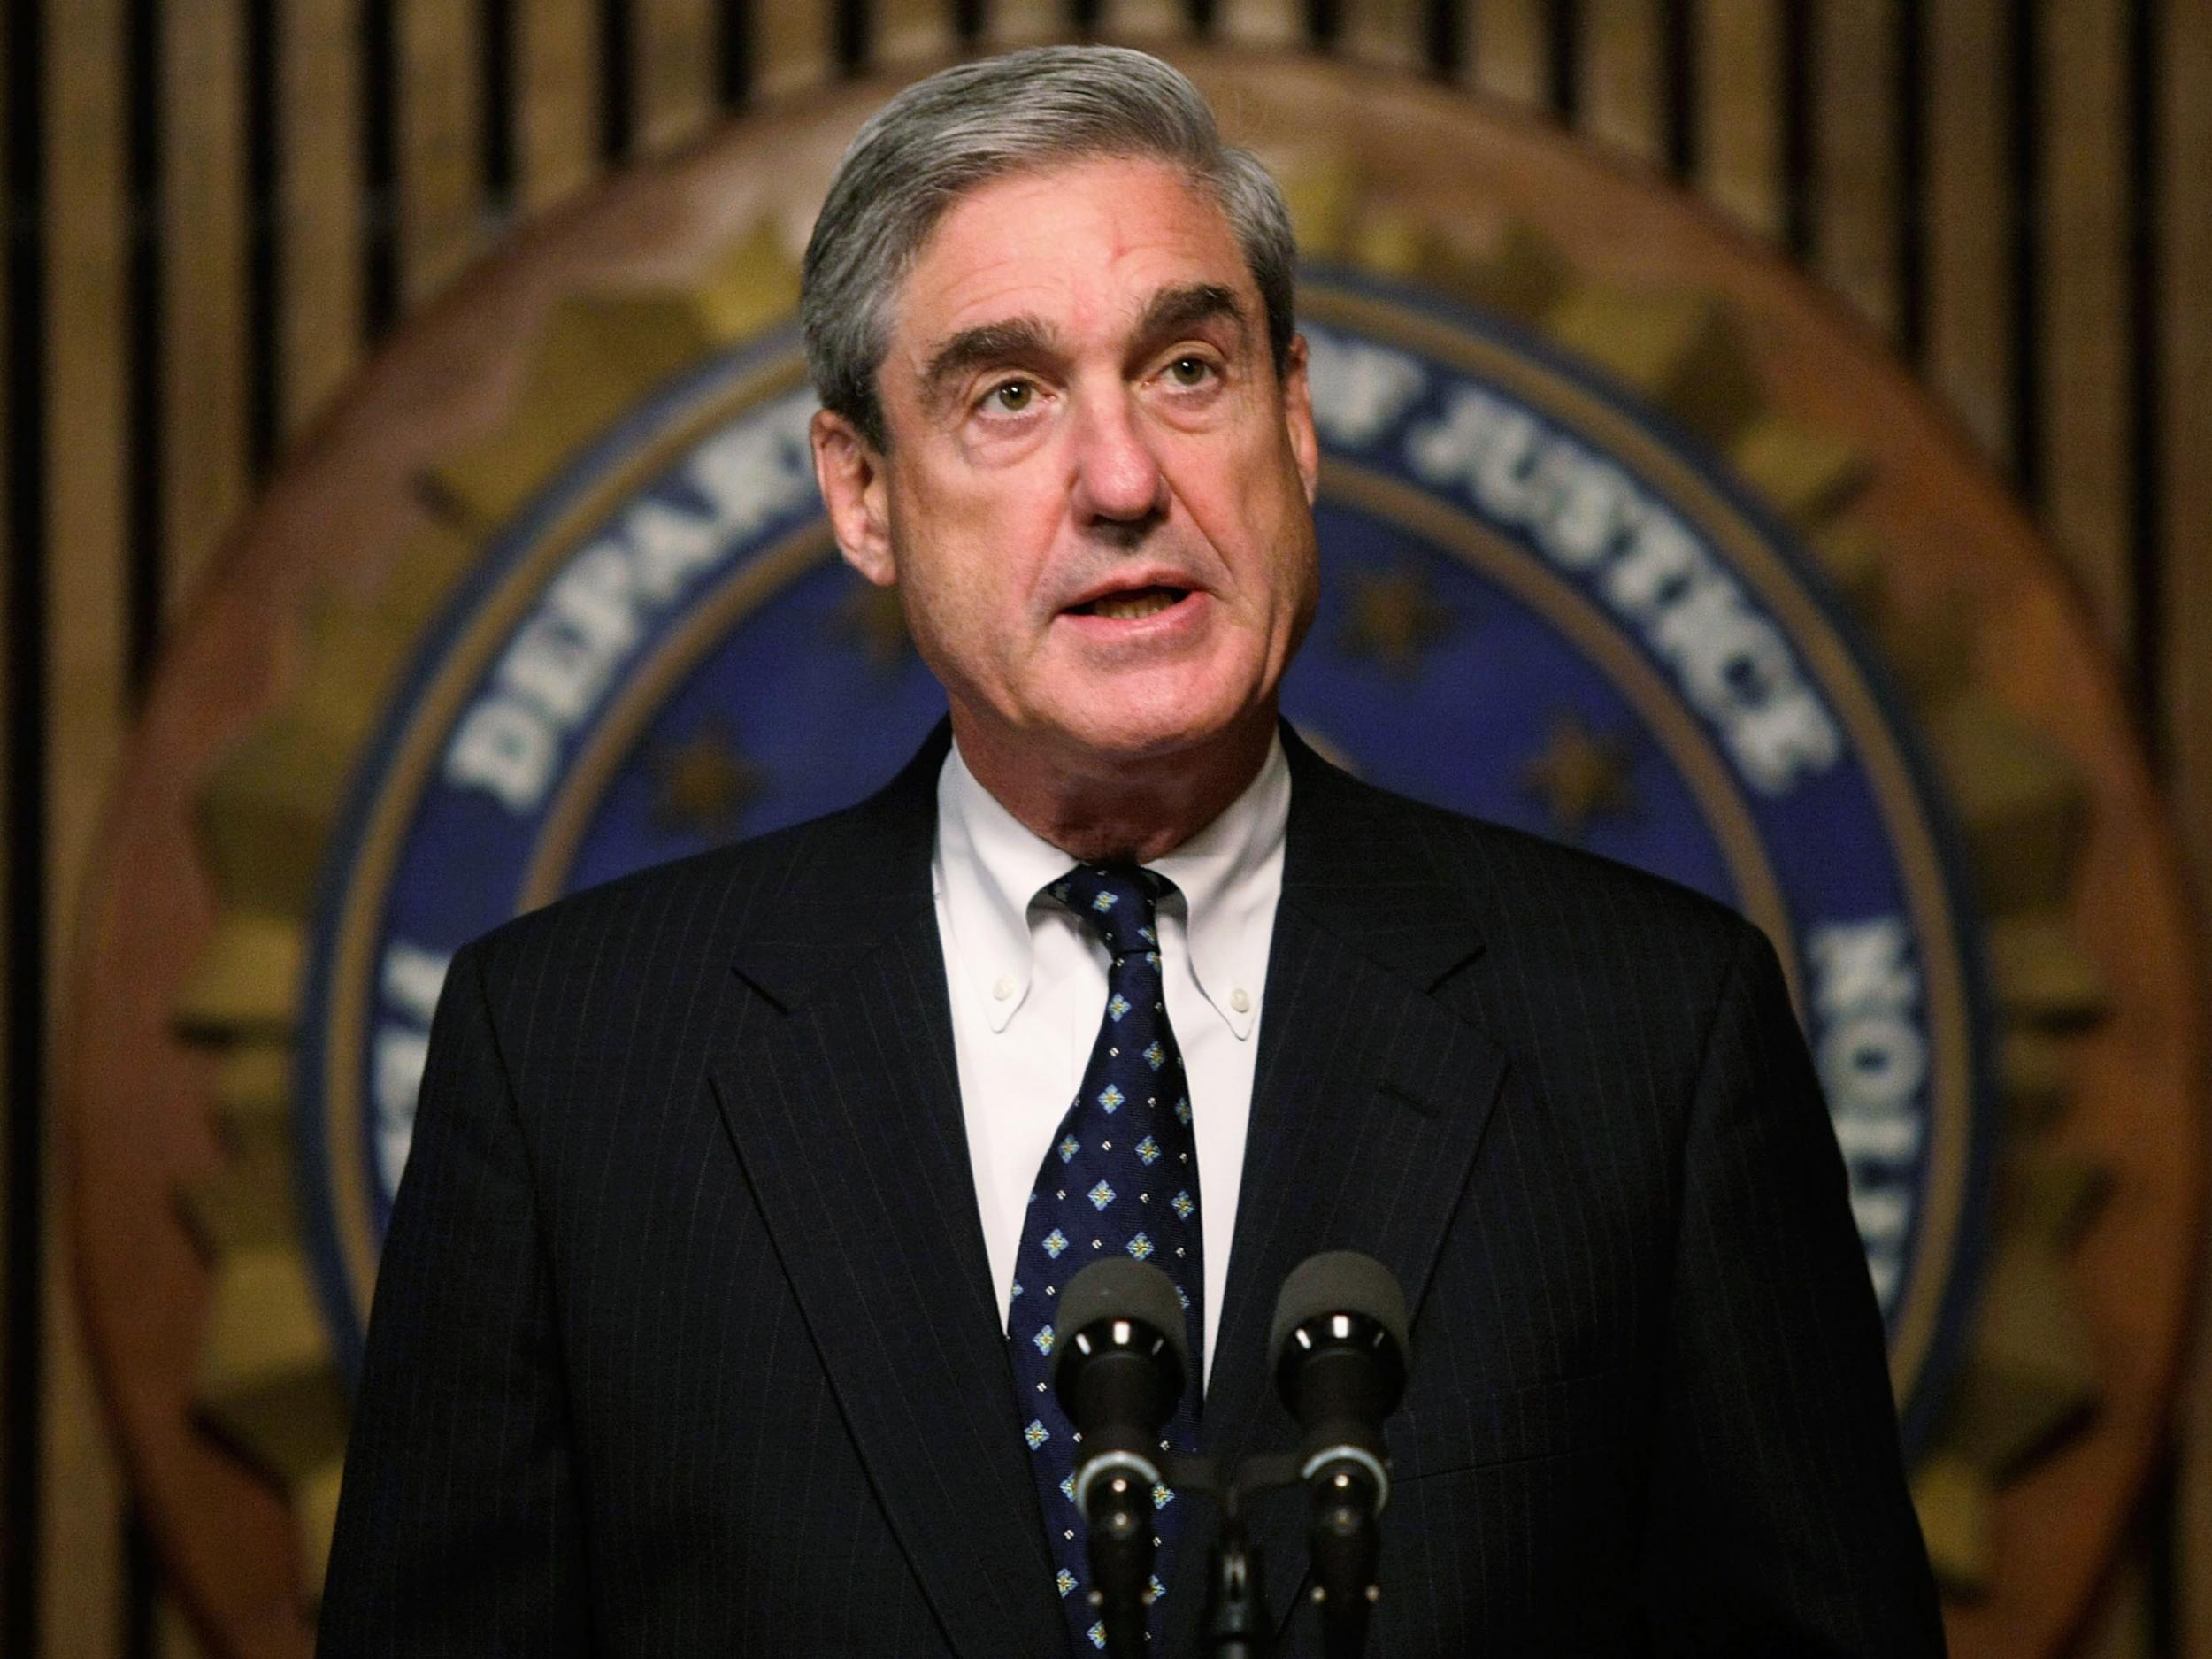 Mr Mueller's team provided to federal prosecutors who raided Mr Trump's personal attorney's office